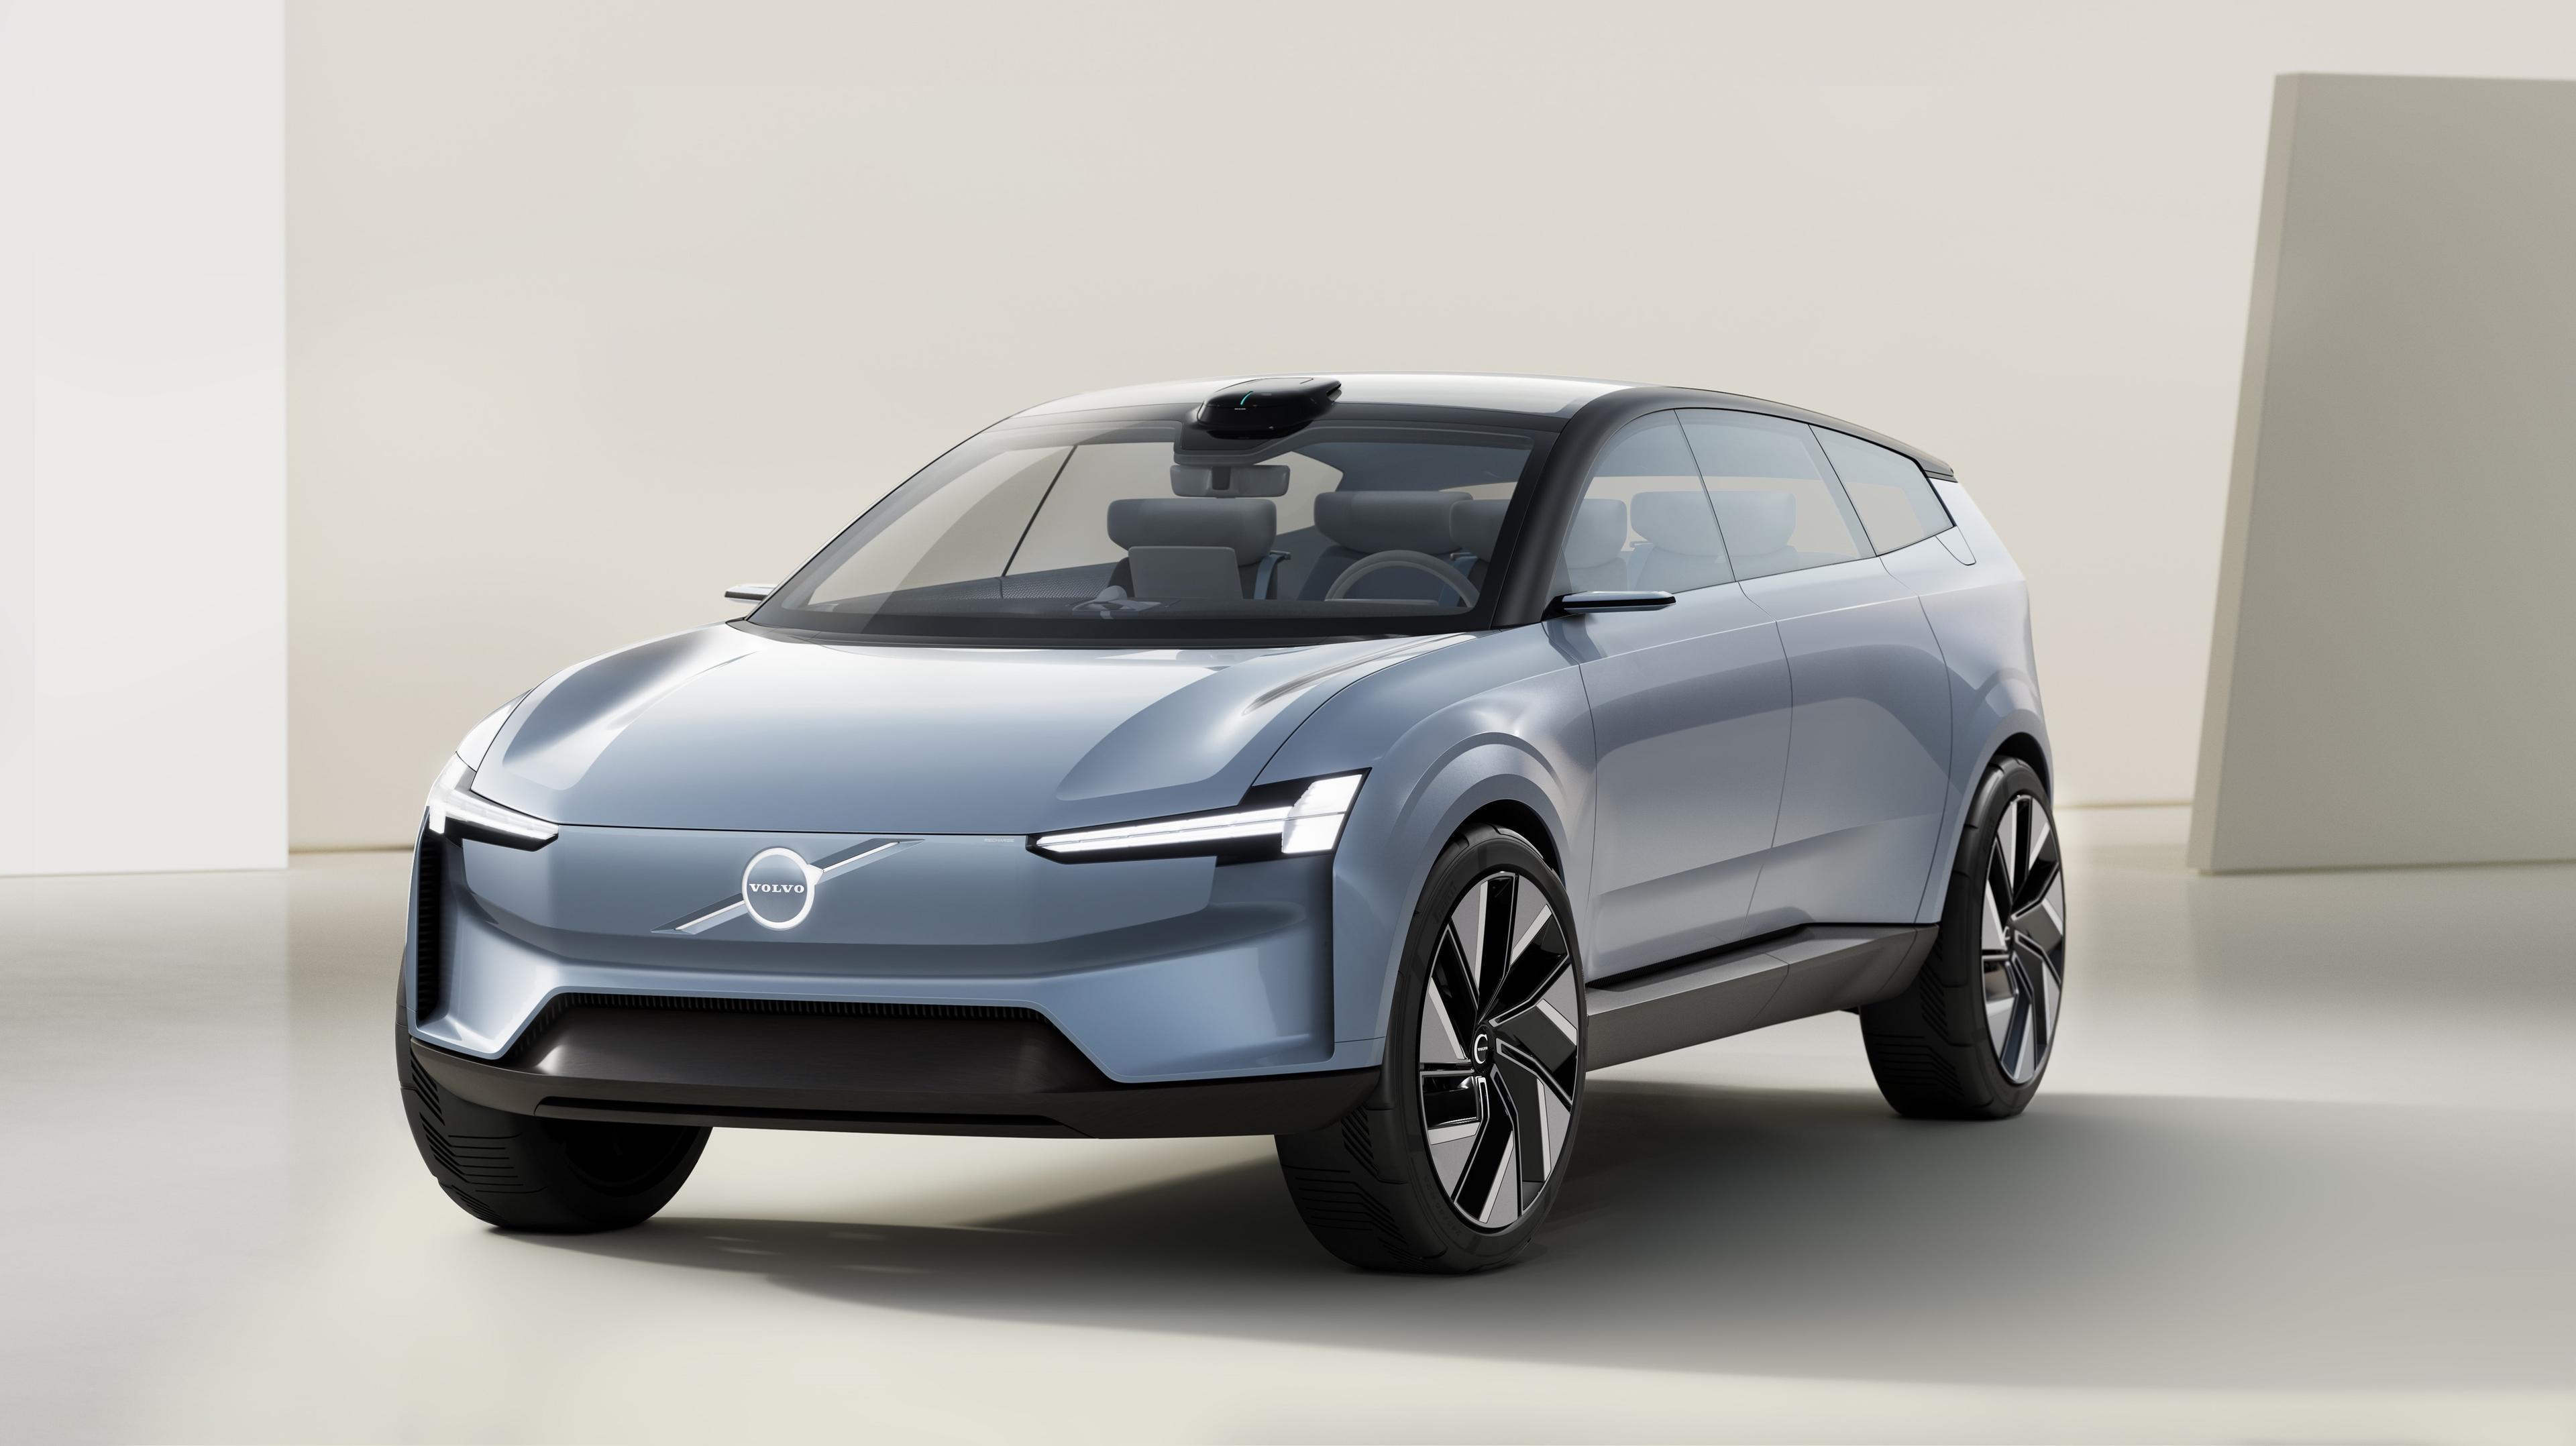 Volvo is committed to an electric future